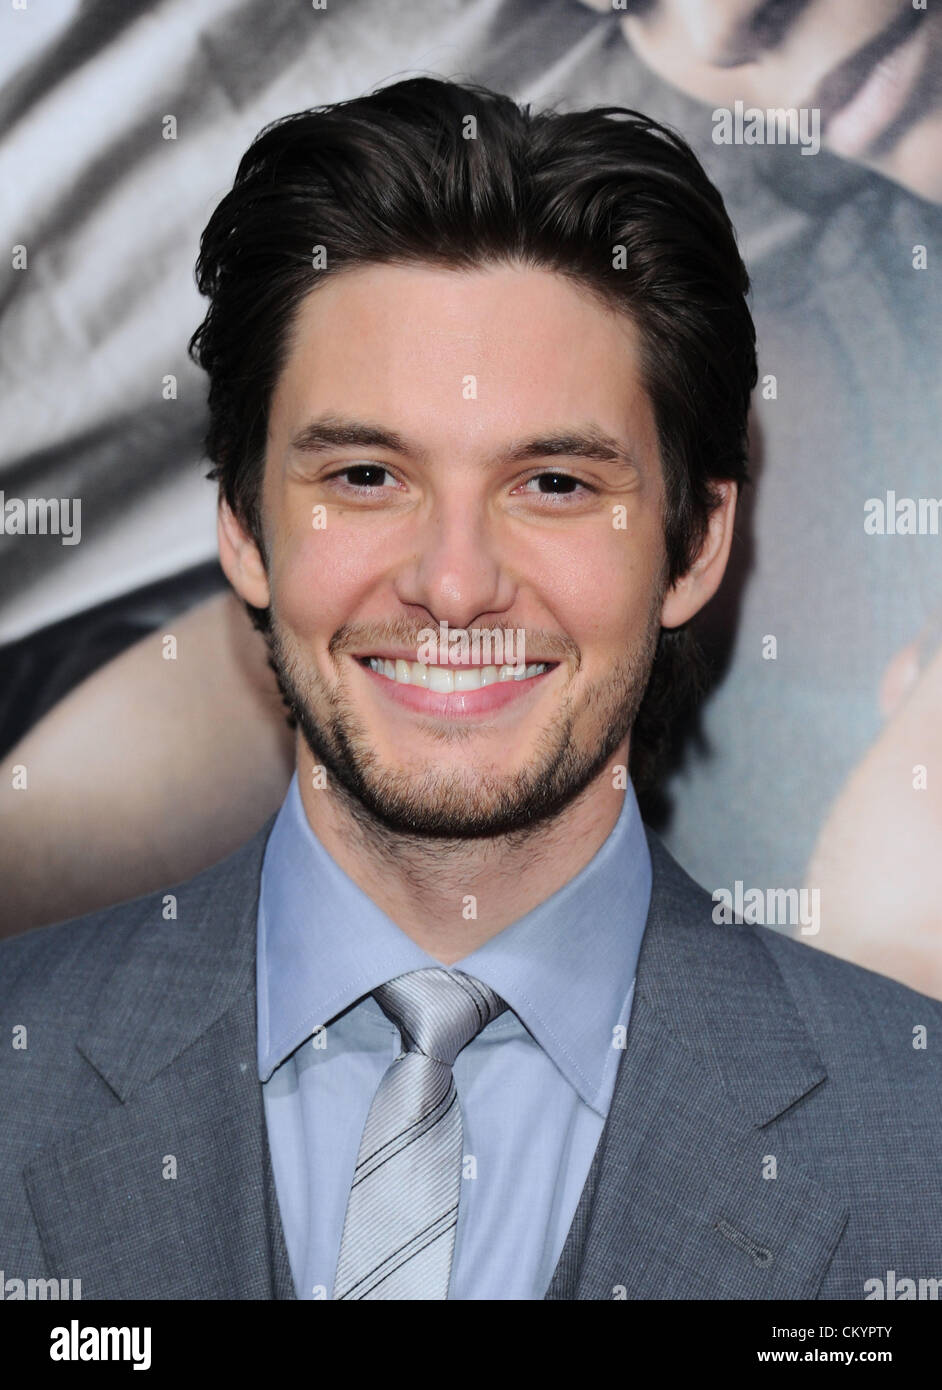 Los Angeles, USA. 4. September 2012. Ben Barnes in "The Words" Filmpremiere, Los Angeles, USA Stockfoto